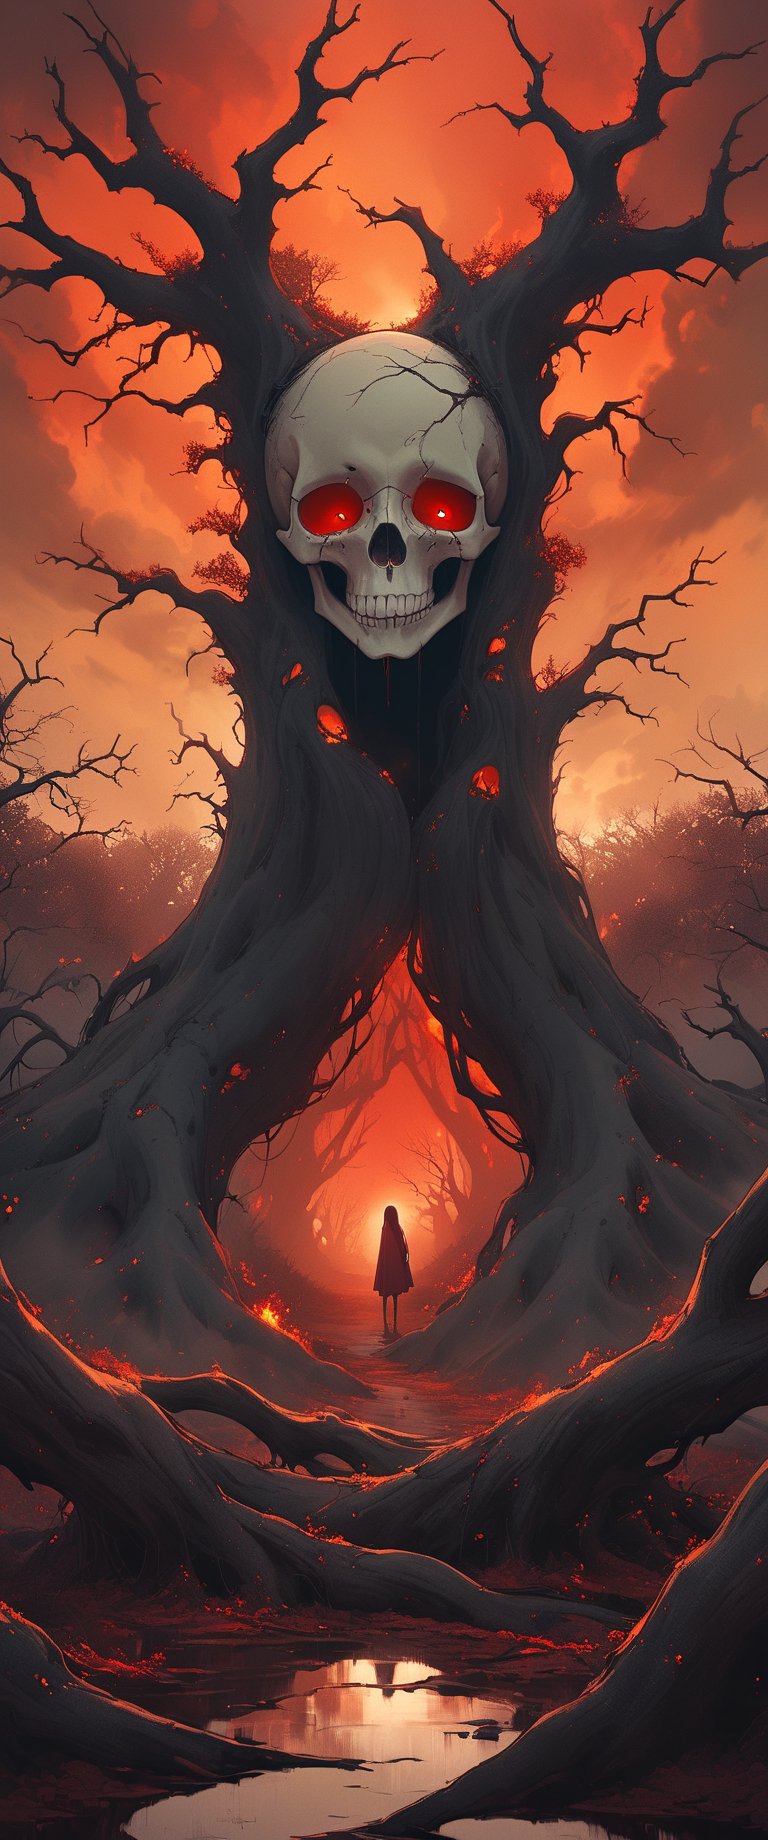 Digital Art intertwining the elements of Languish and Skullscorch, portraying a dark and eerie composition that exudes a sense of profound sorrow and inner turmoil. The scene is set in a surreal, otherworldly realm with twisted, gnarled trees and a blood-red sky. A skull engulfed in intense flames hovers in the center, emitting a spectral light that casts ominous shadows. The artwork conveys a feeling of anguish, despair, and spiritual unrest, drawing the viewer into a realm of haunting beauty and torment. --s 1000